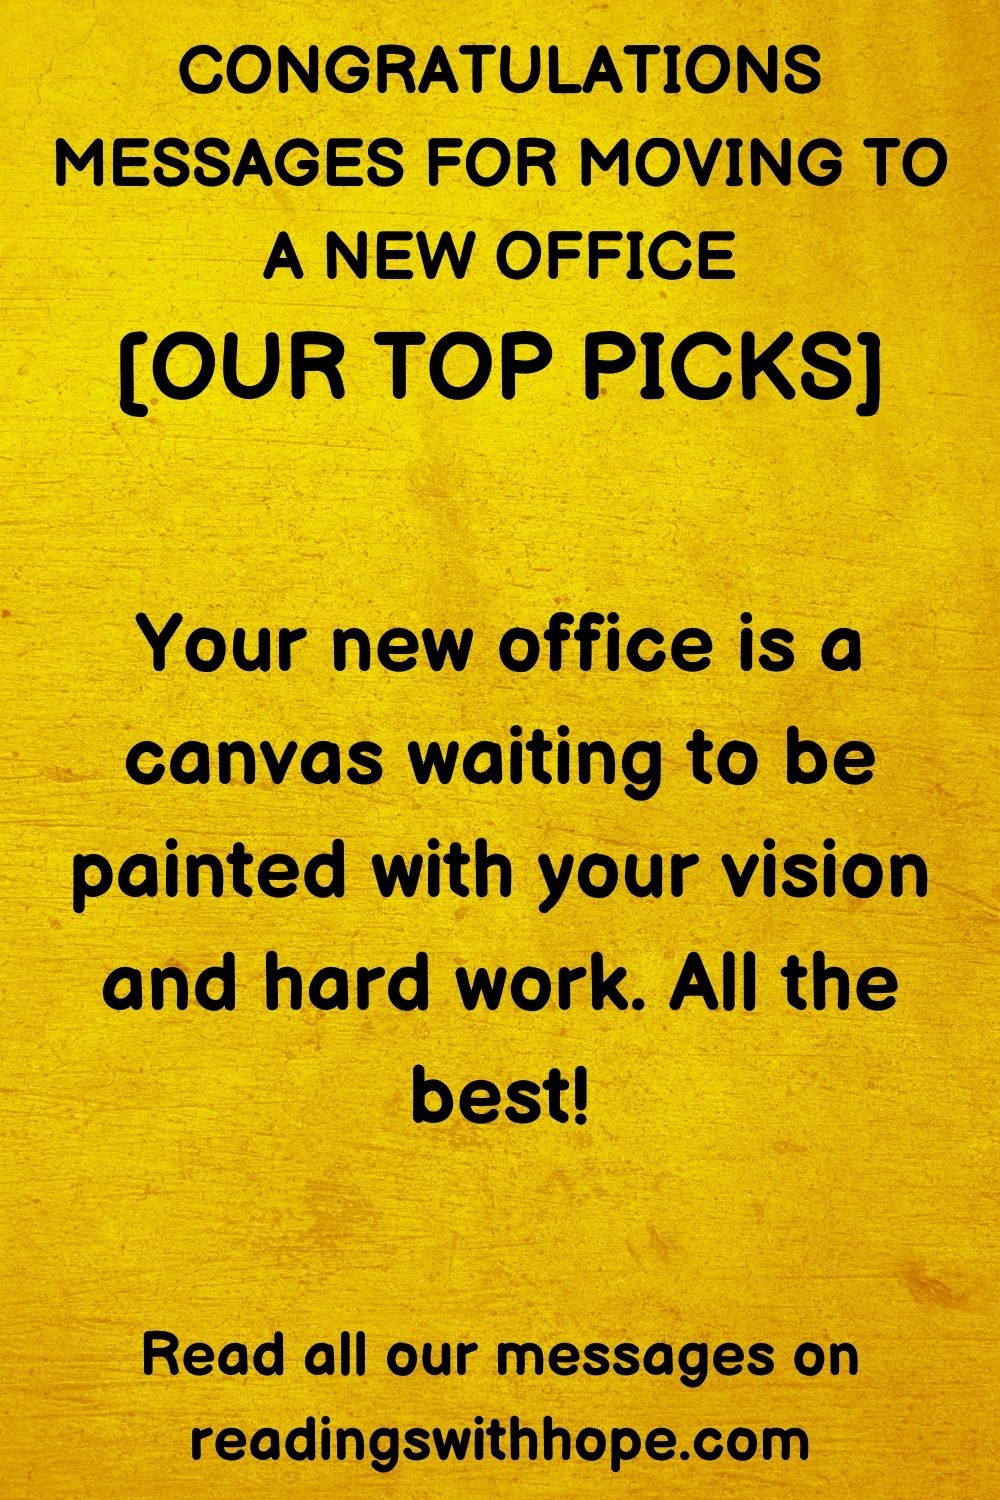 congratulations messages for moving to a new office that says your new office is a canvas waiting to be painted with your vision and hard work. All the best. 